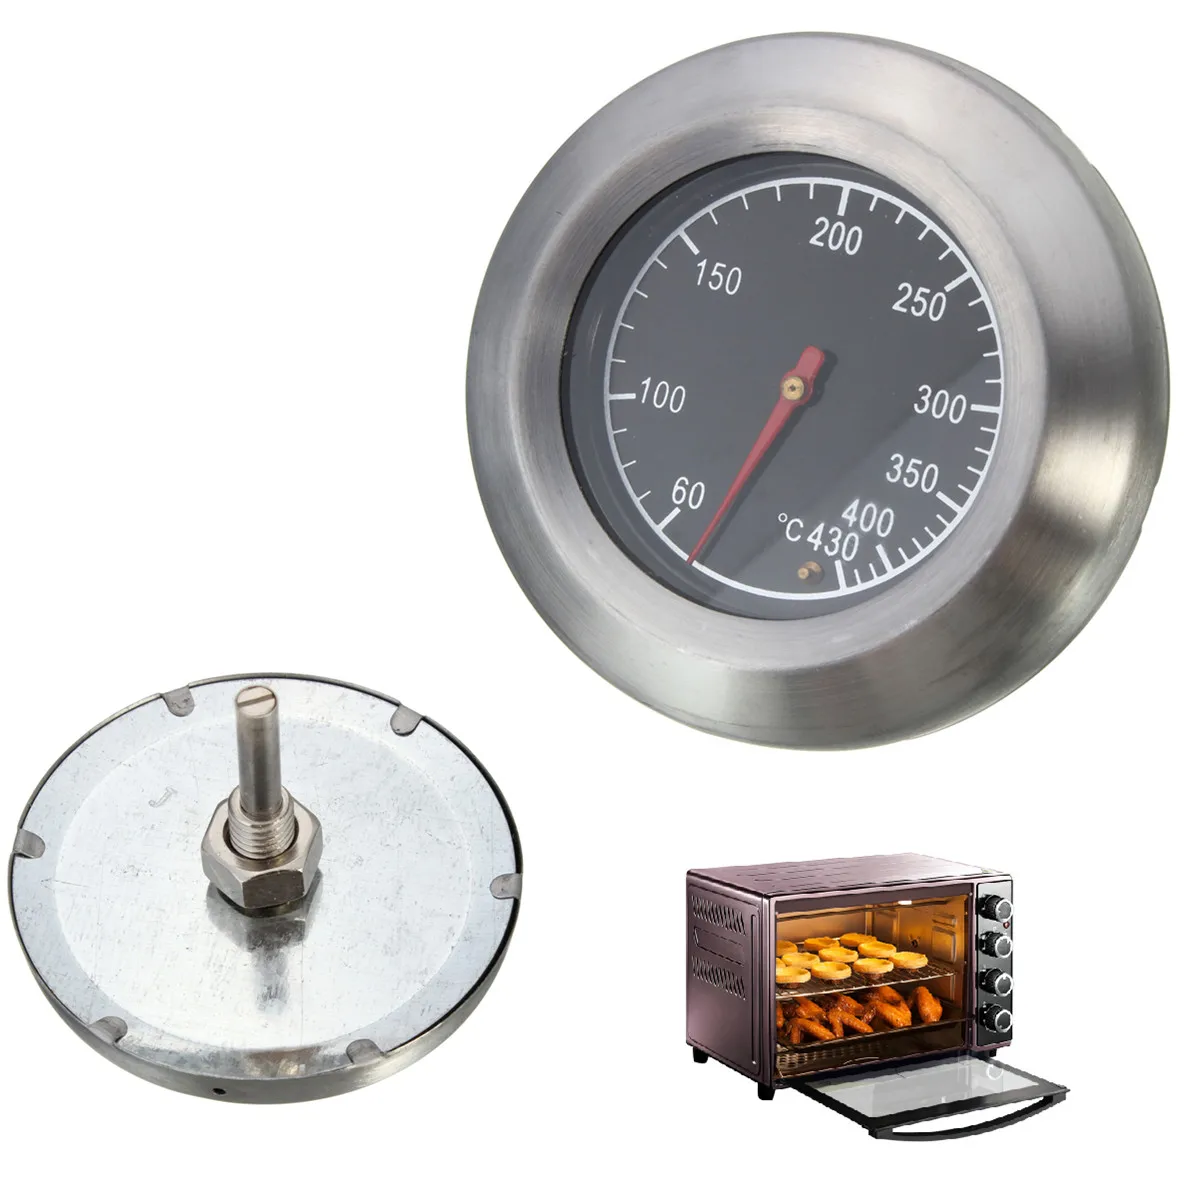 

Temperature Gauge Temperature Controll For Outdoor Stainless Steel BBQ Smoker Grill Thermometer Barbecue 60~430Degrees Celsius